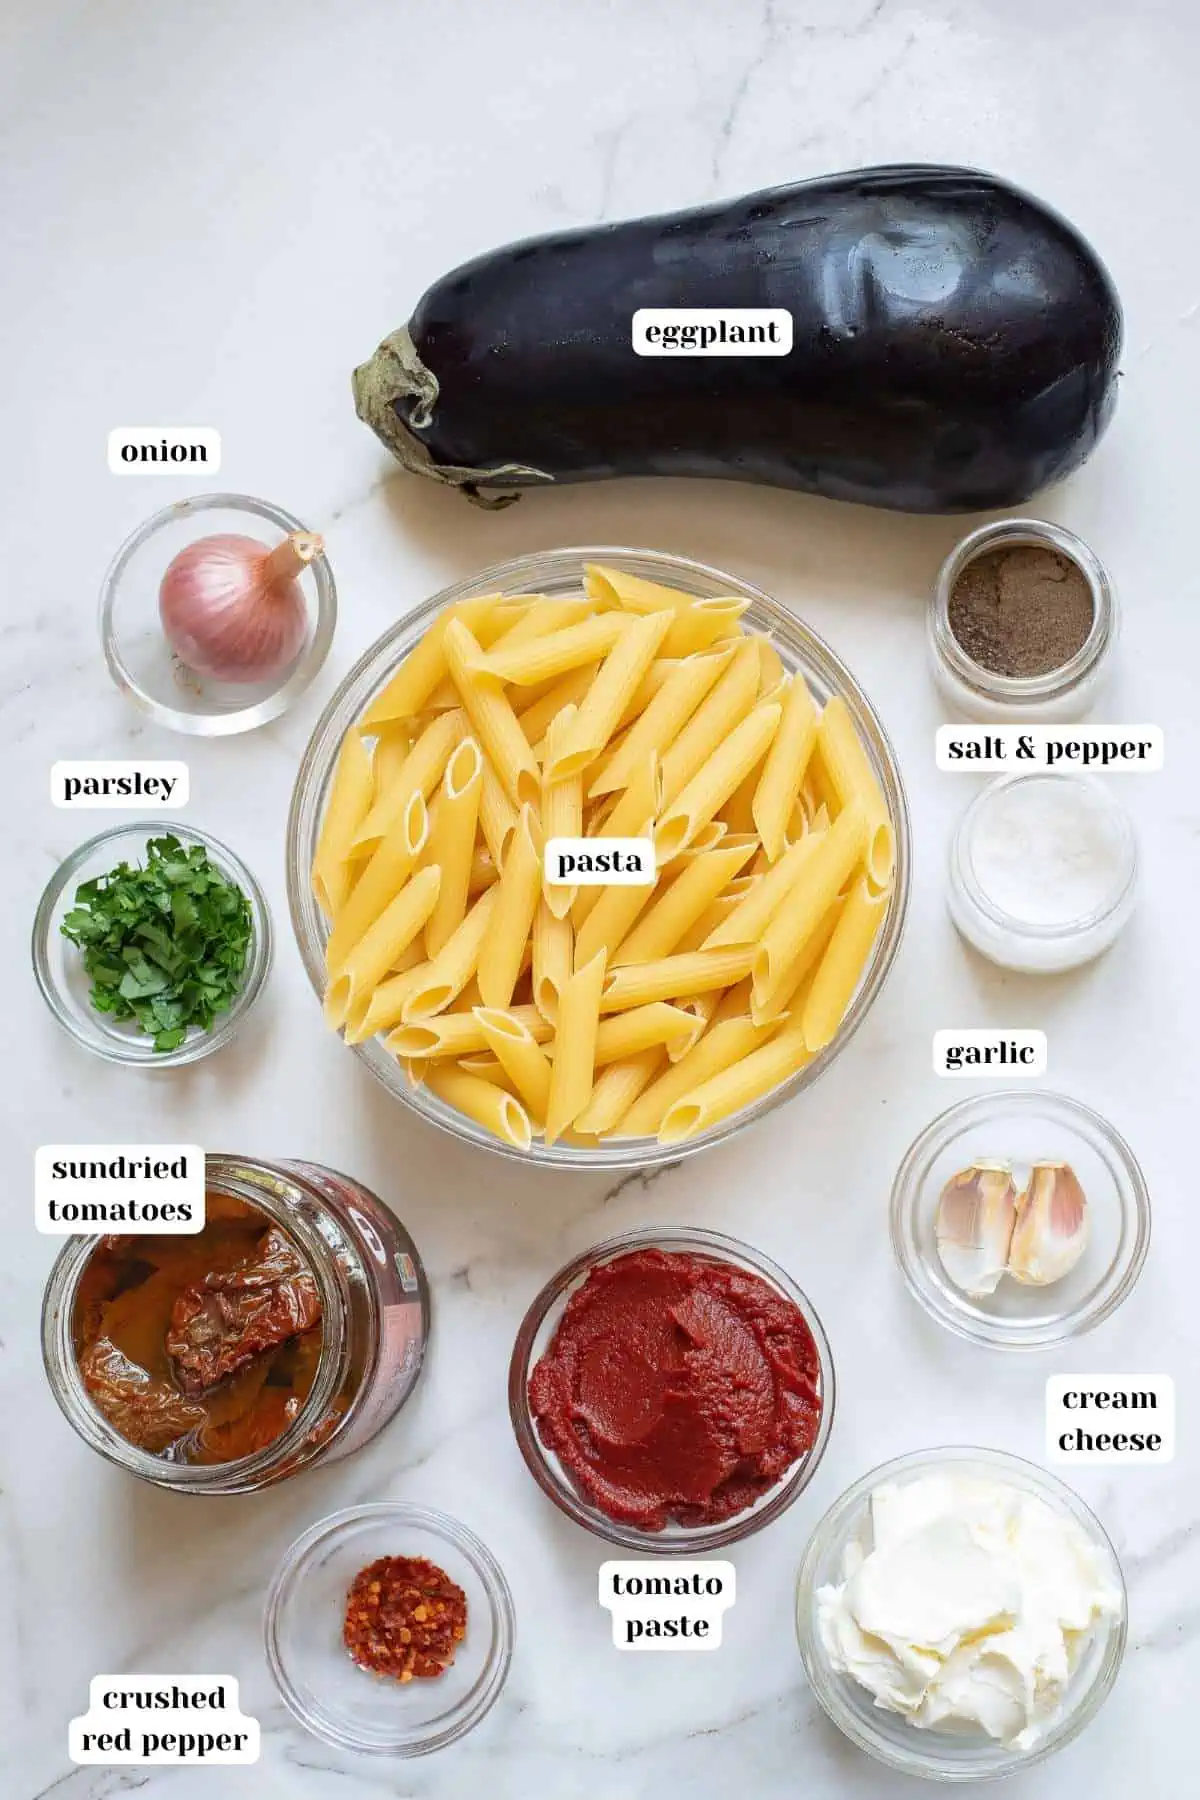 Ingredients to make an easy recipe for pasta alla norma.